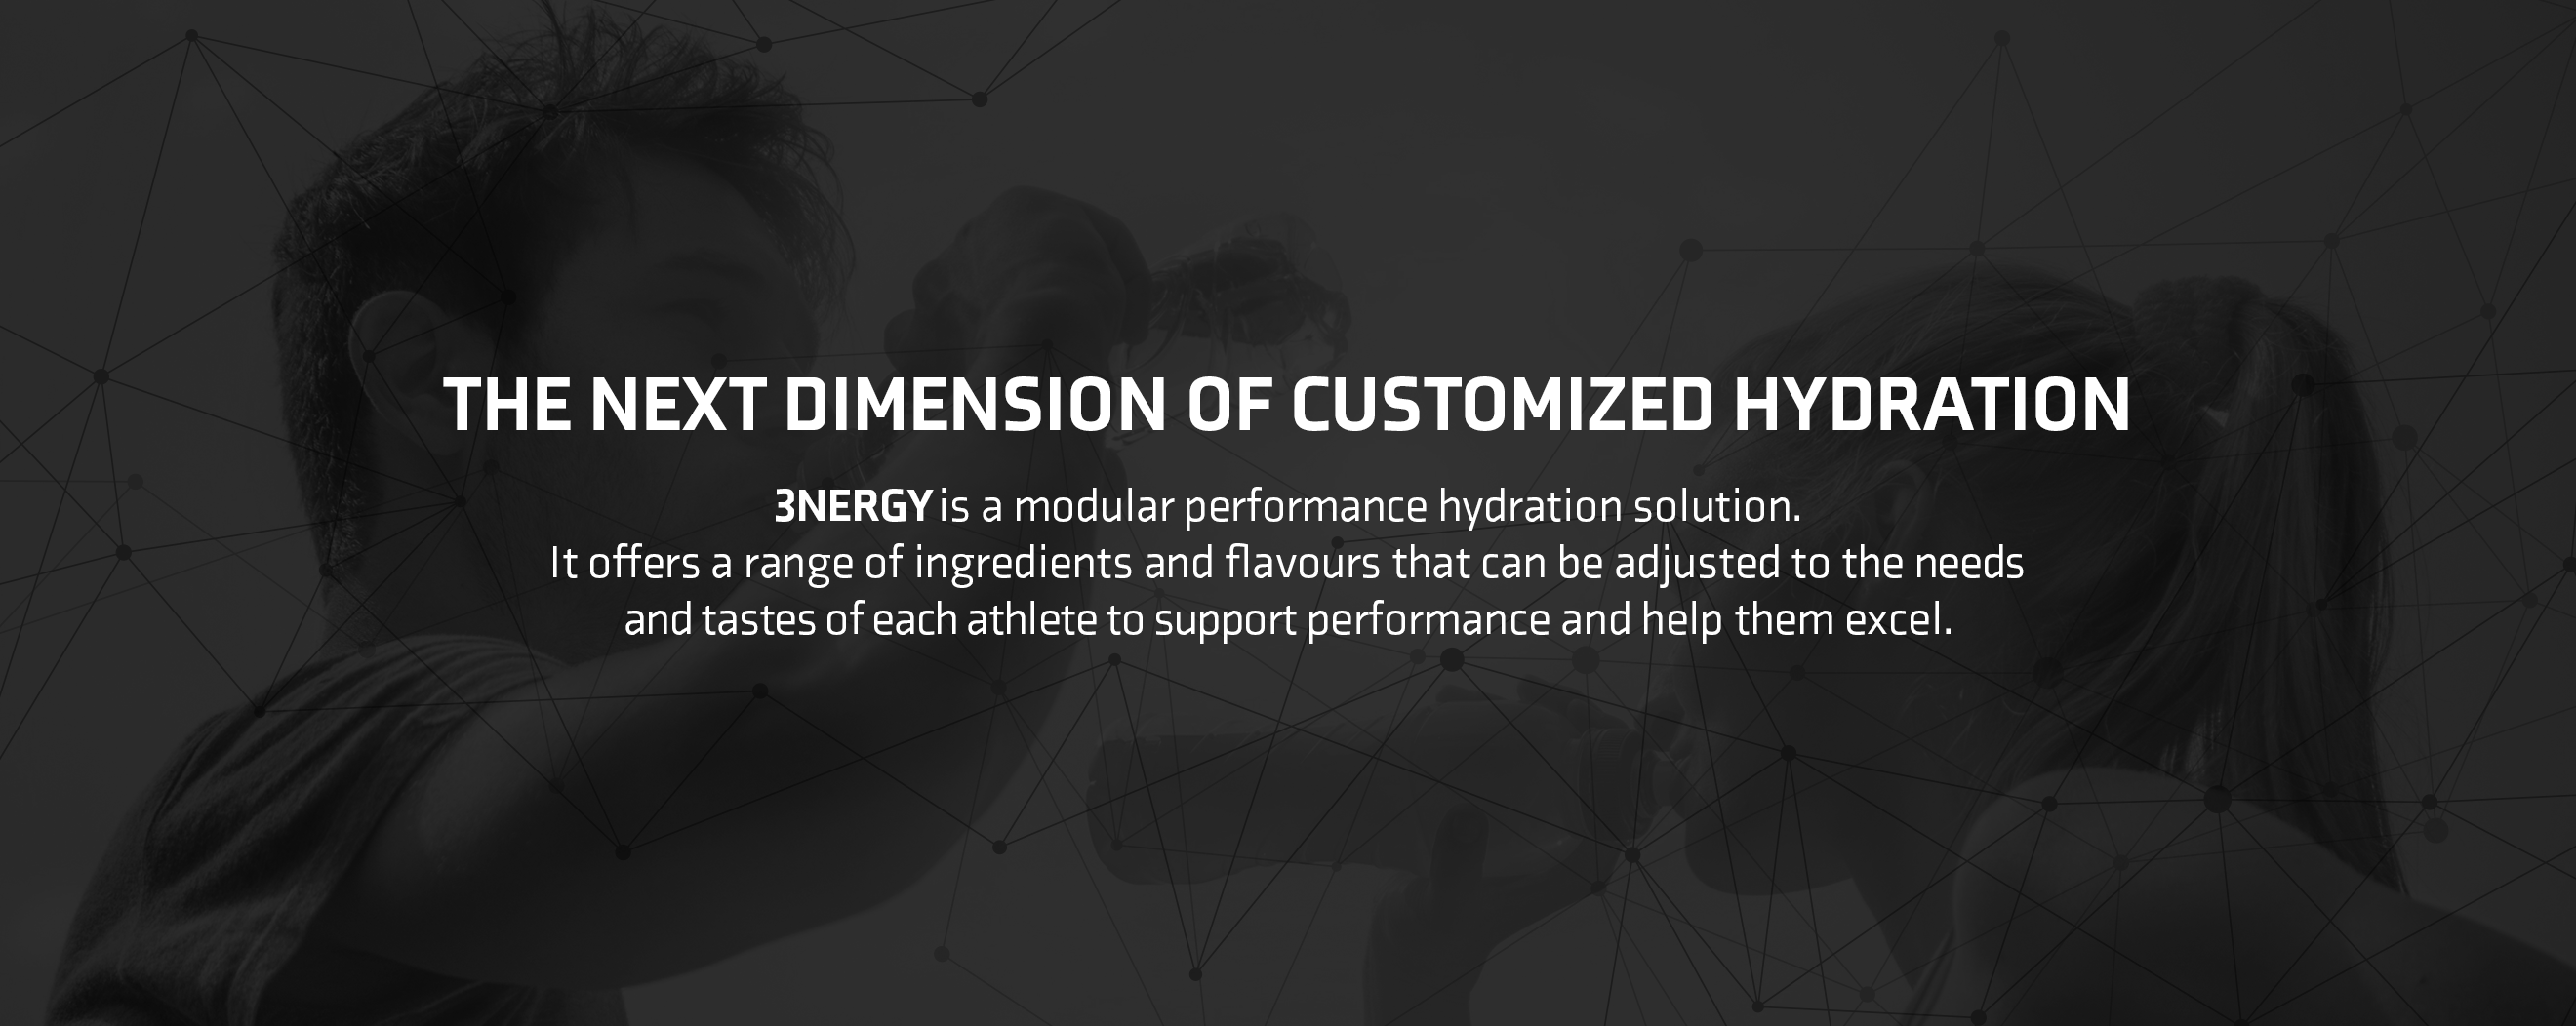 THE NEXT DIMENSION OF CUSTOMIZED HYDRATION 3NERGY is a modular performance hydration solution. It offers a range of ingredients and flavours that can be adjusted to the needs and tastes of each athlete to support performance and help them excel.